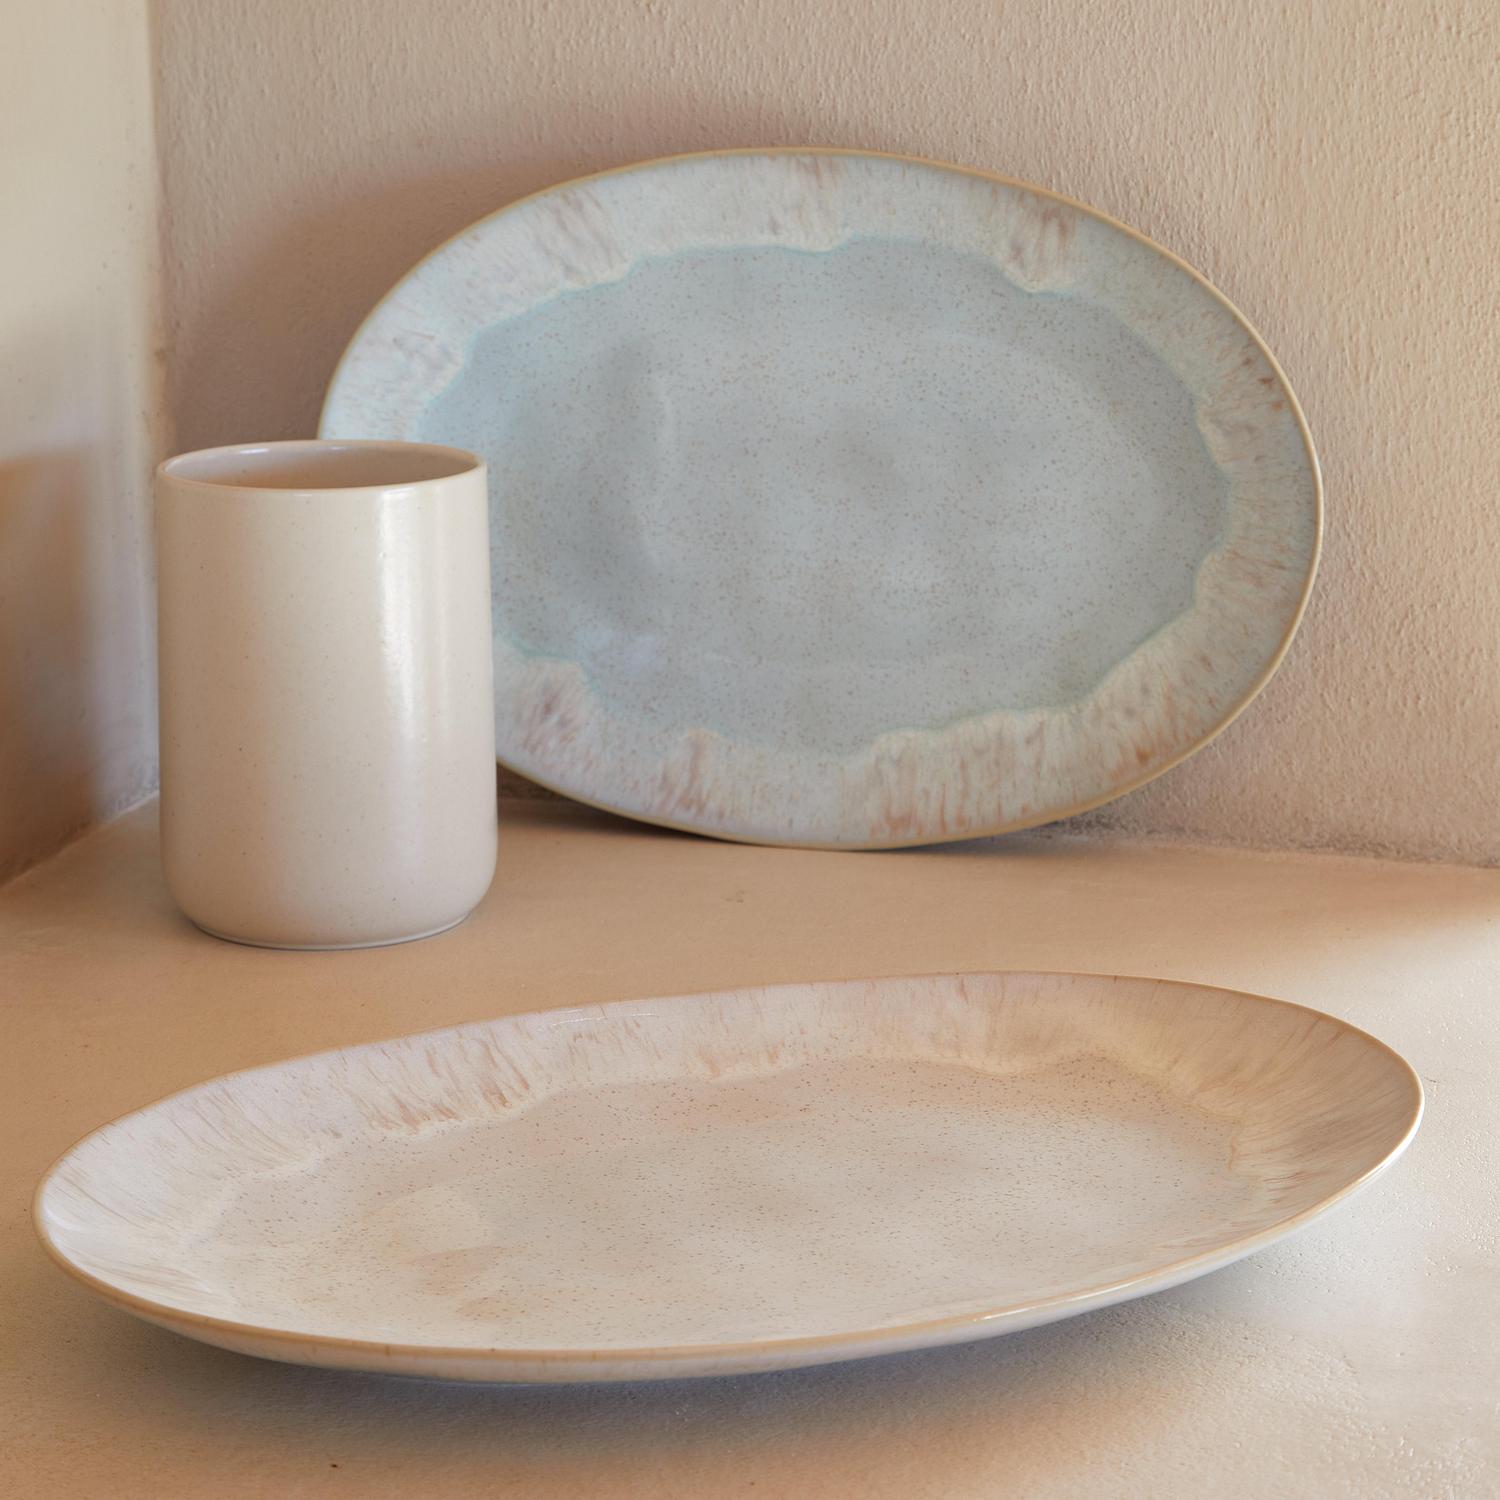 Handcrafted ceramic tableware in rustic style against pale backdrop.